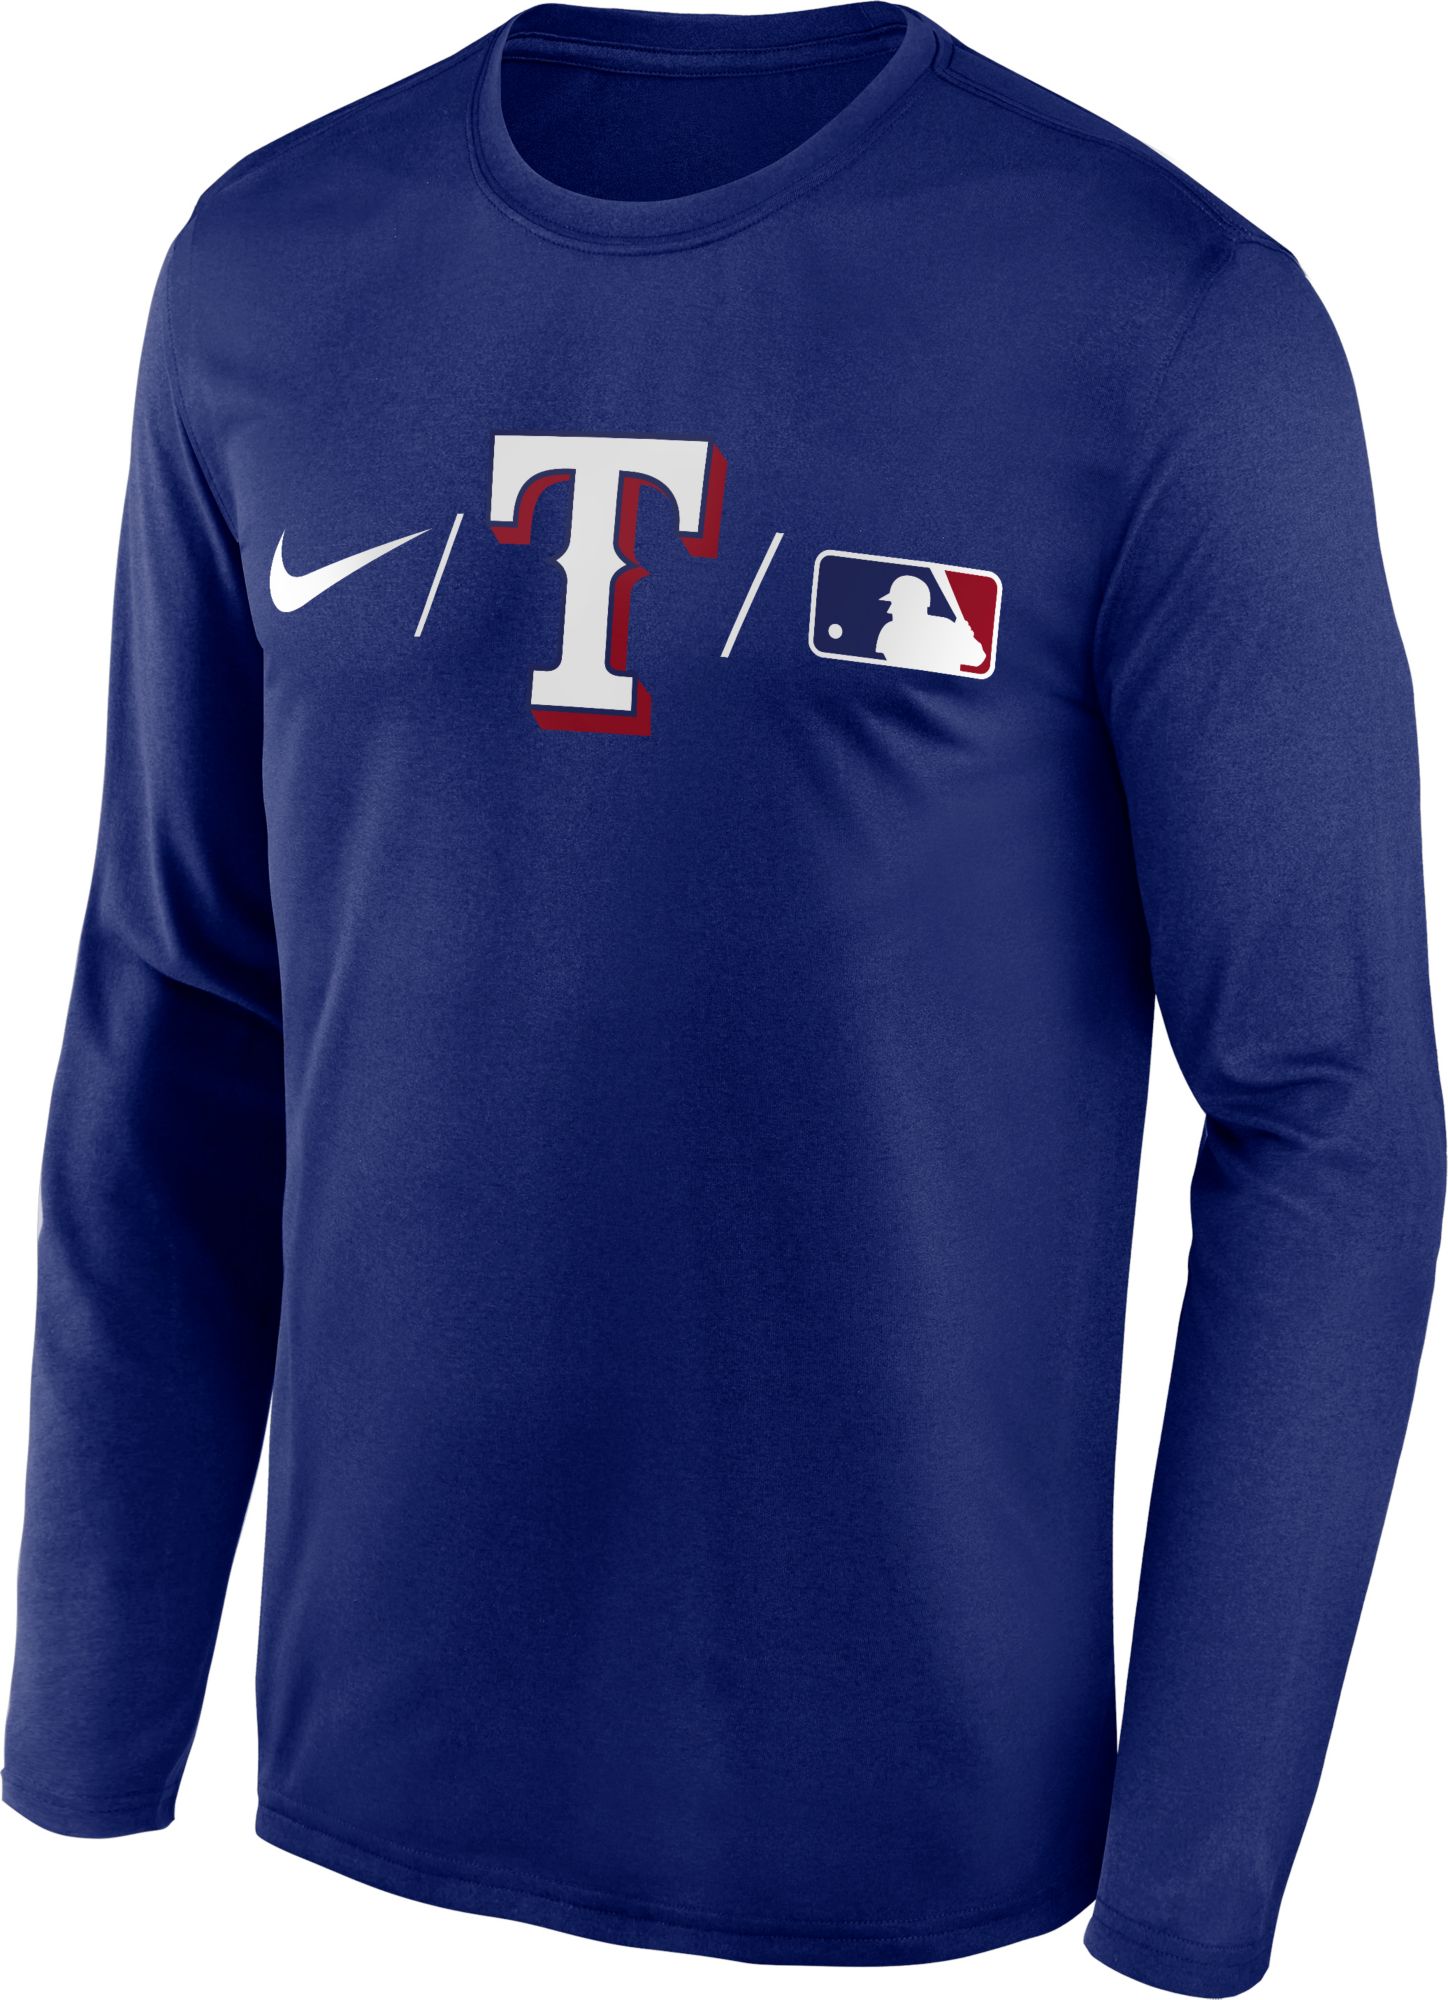 Women's Concepts Sport Royal New York Mets Tri-Blend Mainstream Terry Short Sleeve Sweatshirt Top Size: Small